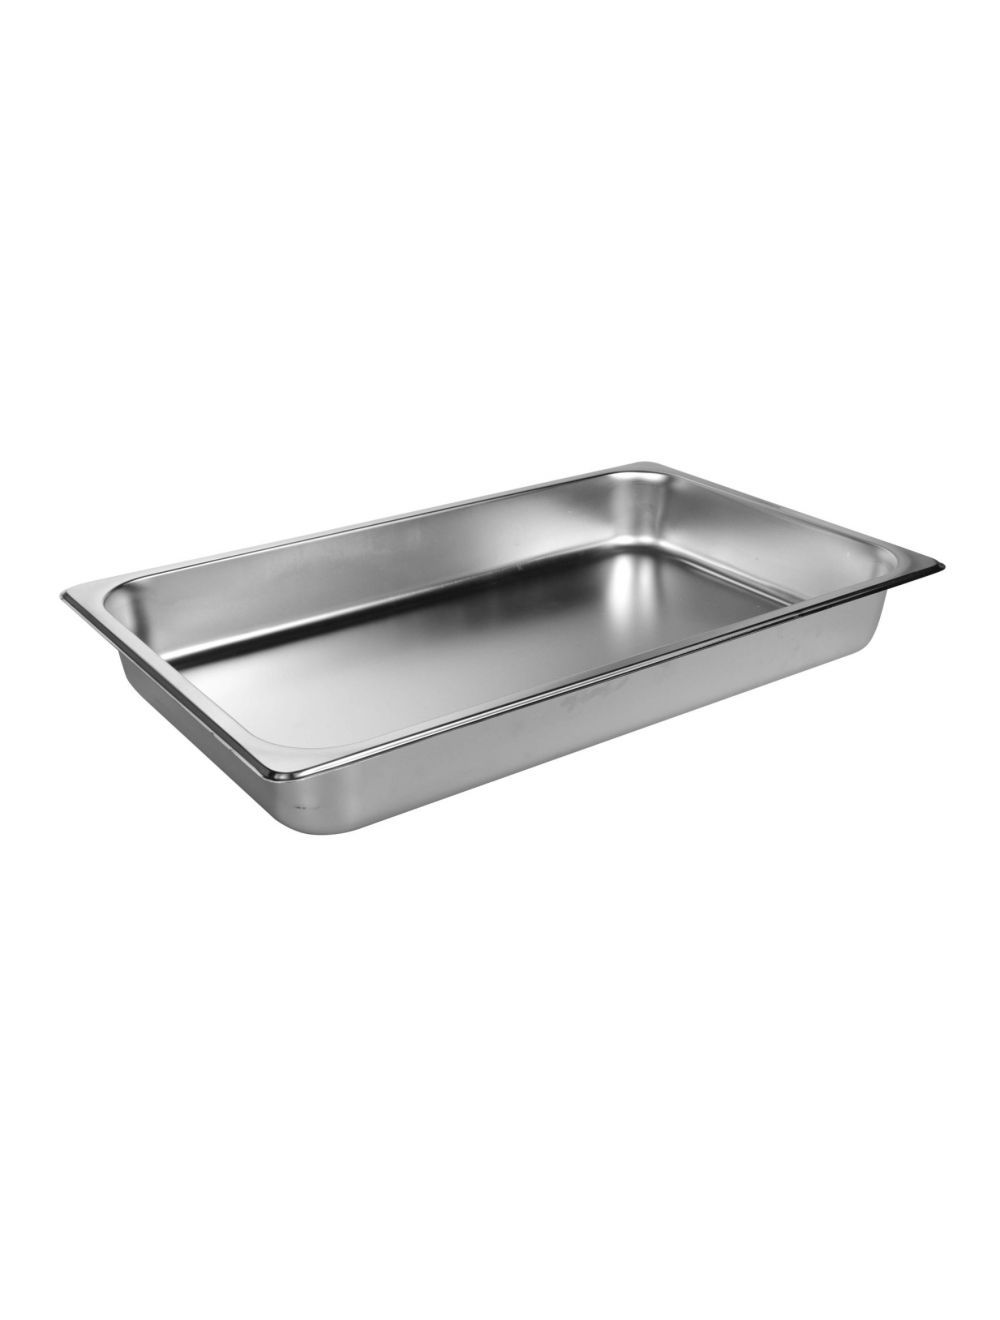 Royalford RF9423 Stainless Steel GN Pan, 530x325x65 MM